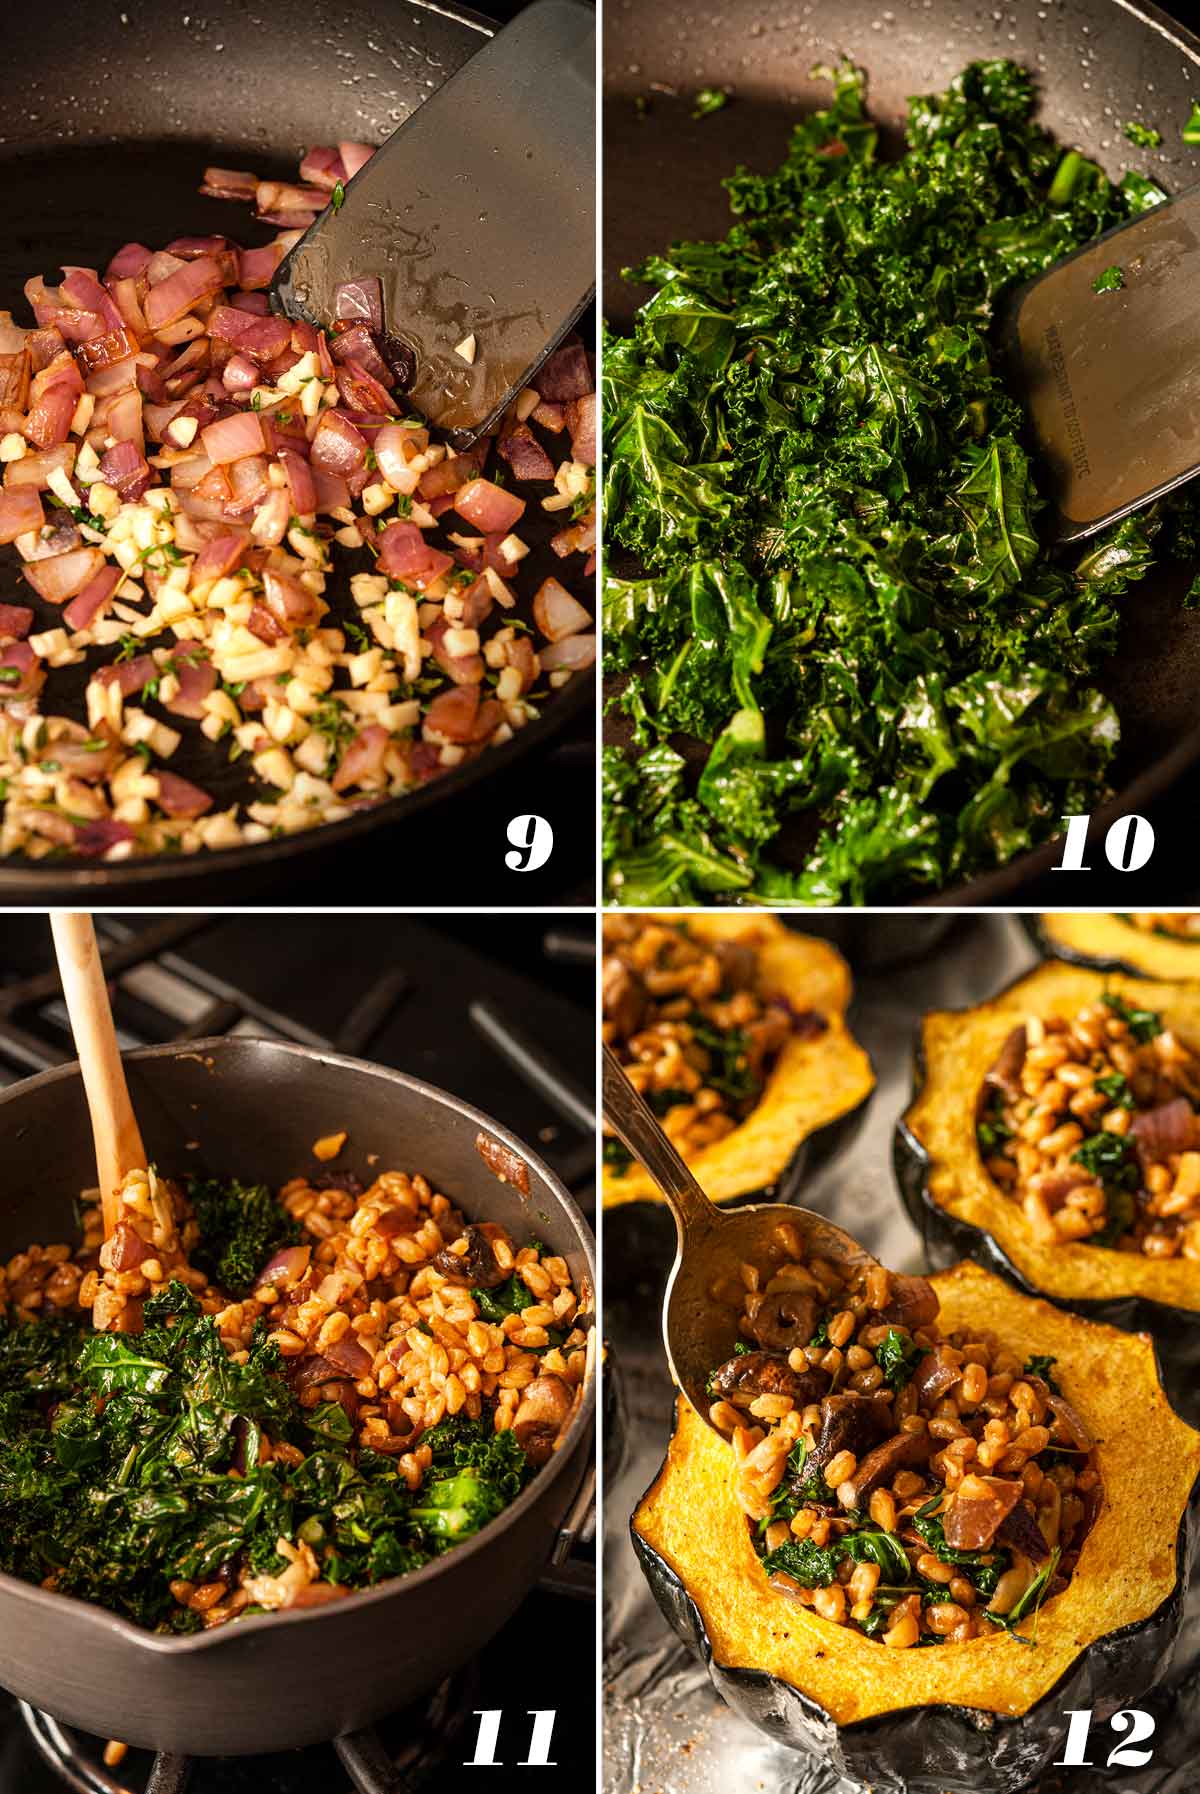 A collage of 4 numbered images showing how to make farro stuffing and stuff squash.